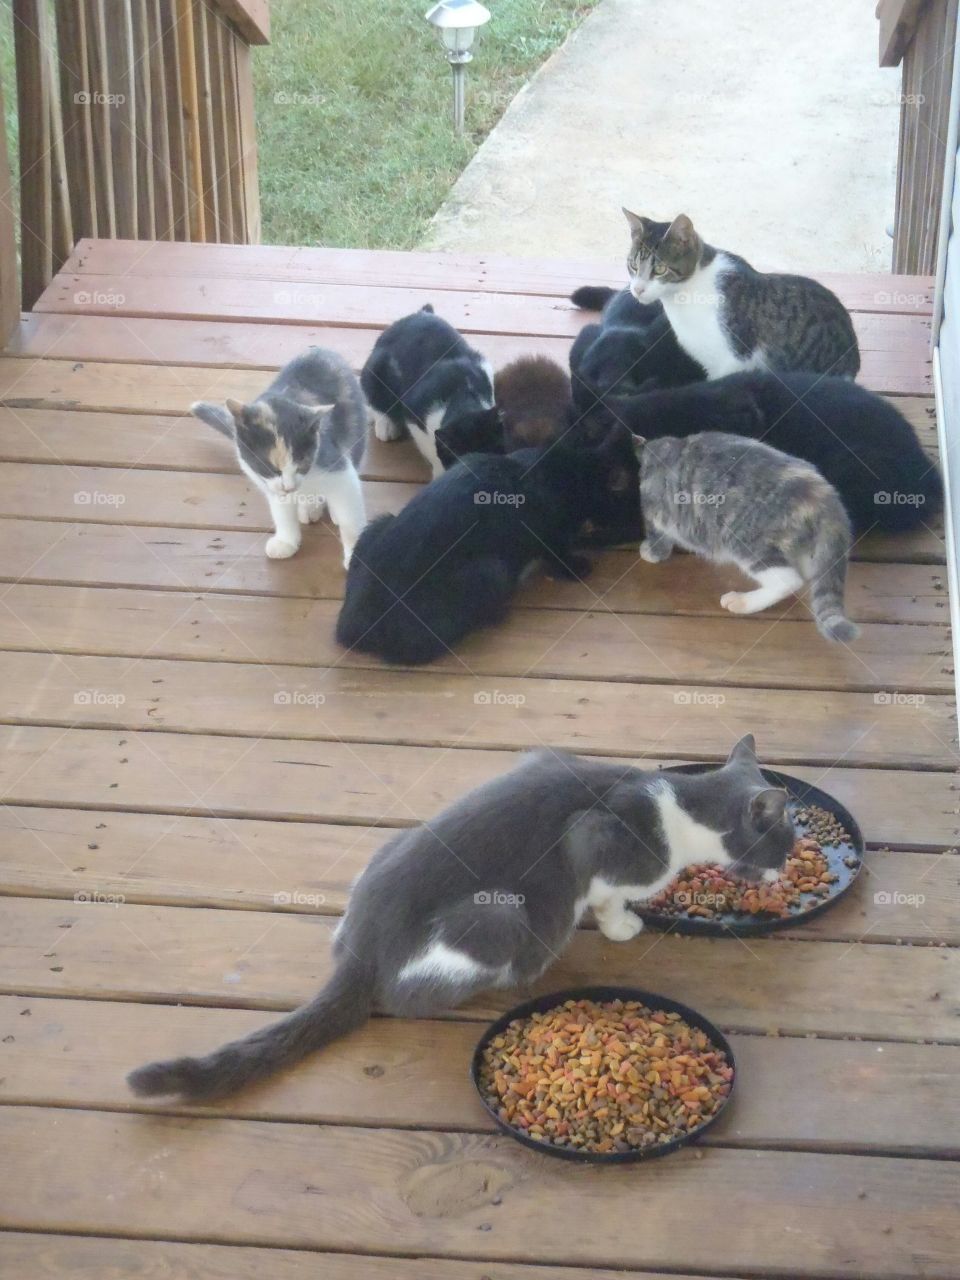 Rural Cats. When renting a house in Georgia, it came with about a dozen cats that it was actually in our lease to feed!